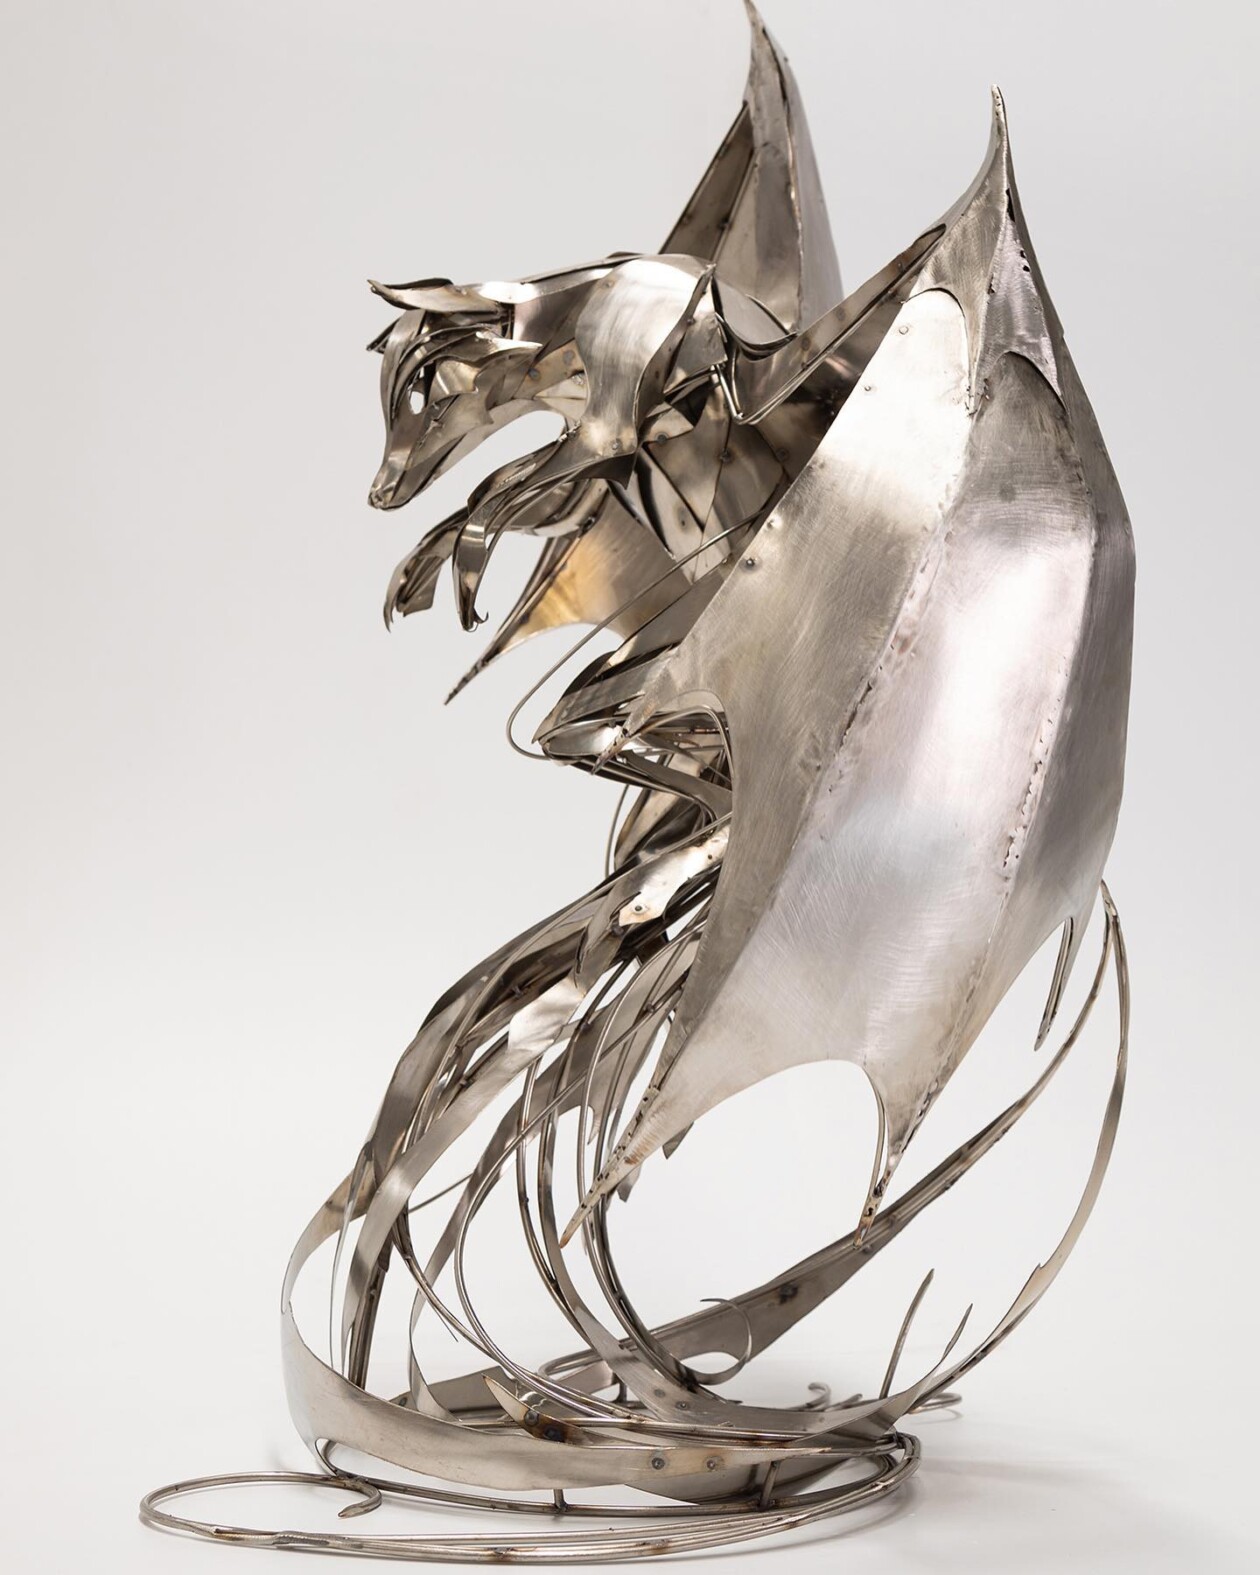 Magnificent Metallic Animal Sculptures Made With Sweeping Lines By Georgie Seccull (9)